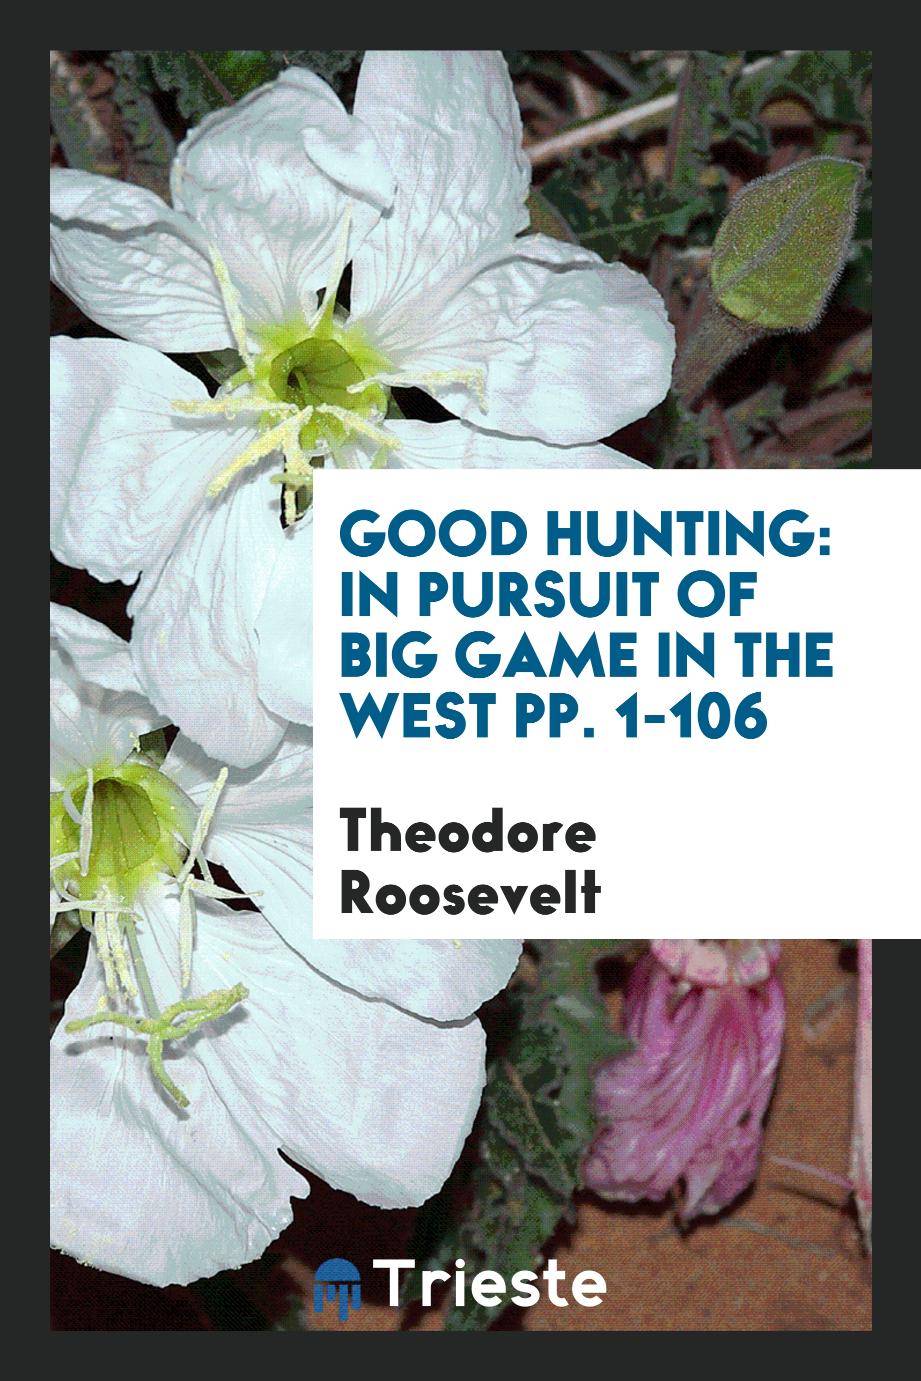 Good Hunting: In Pursuit of Big Game in the West pp. 1-106